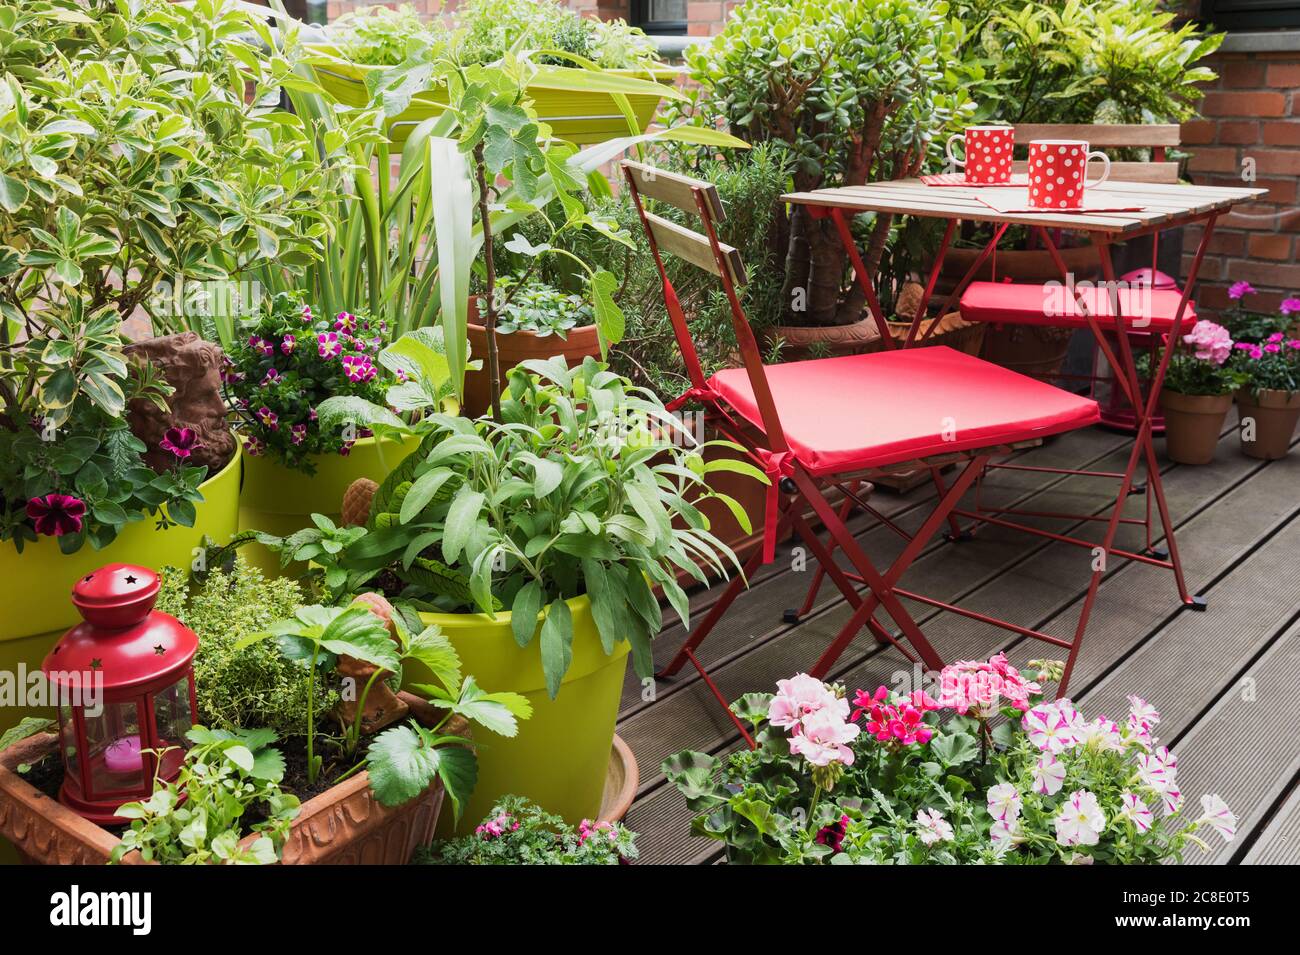 Balcony filled with large variety of potted herbs and flowers Stock Photo